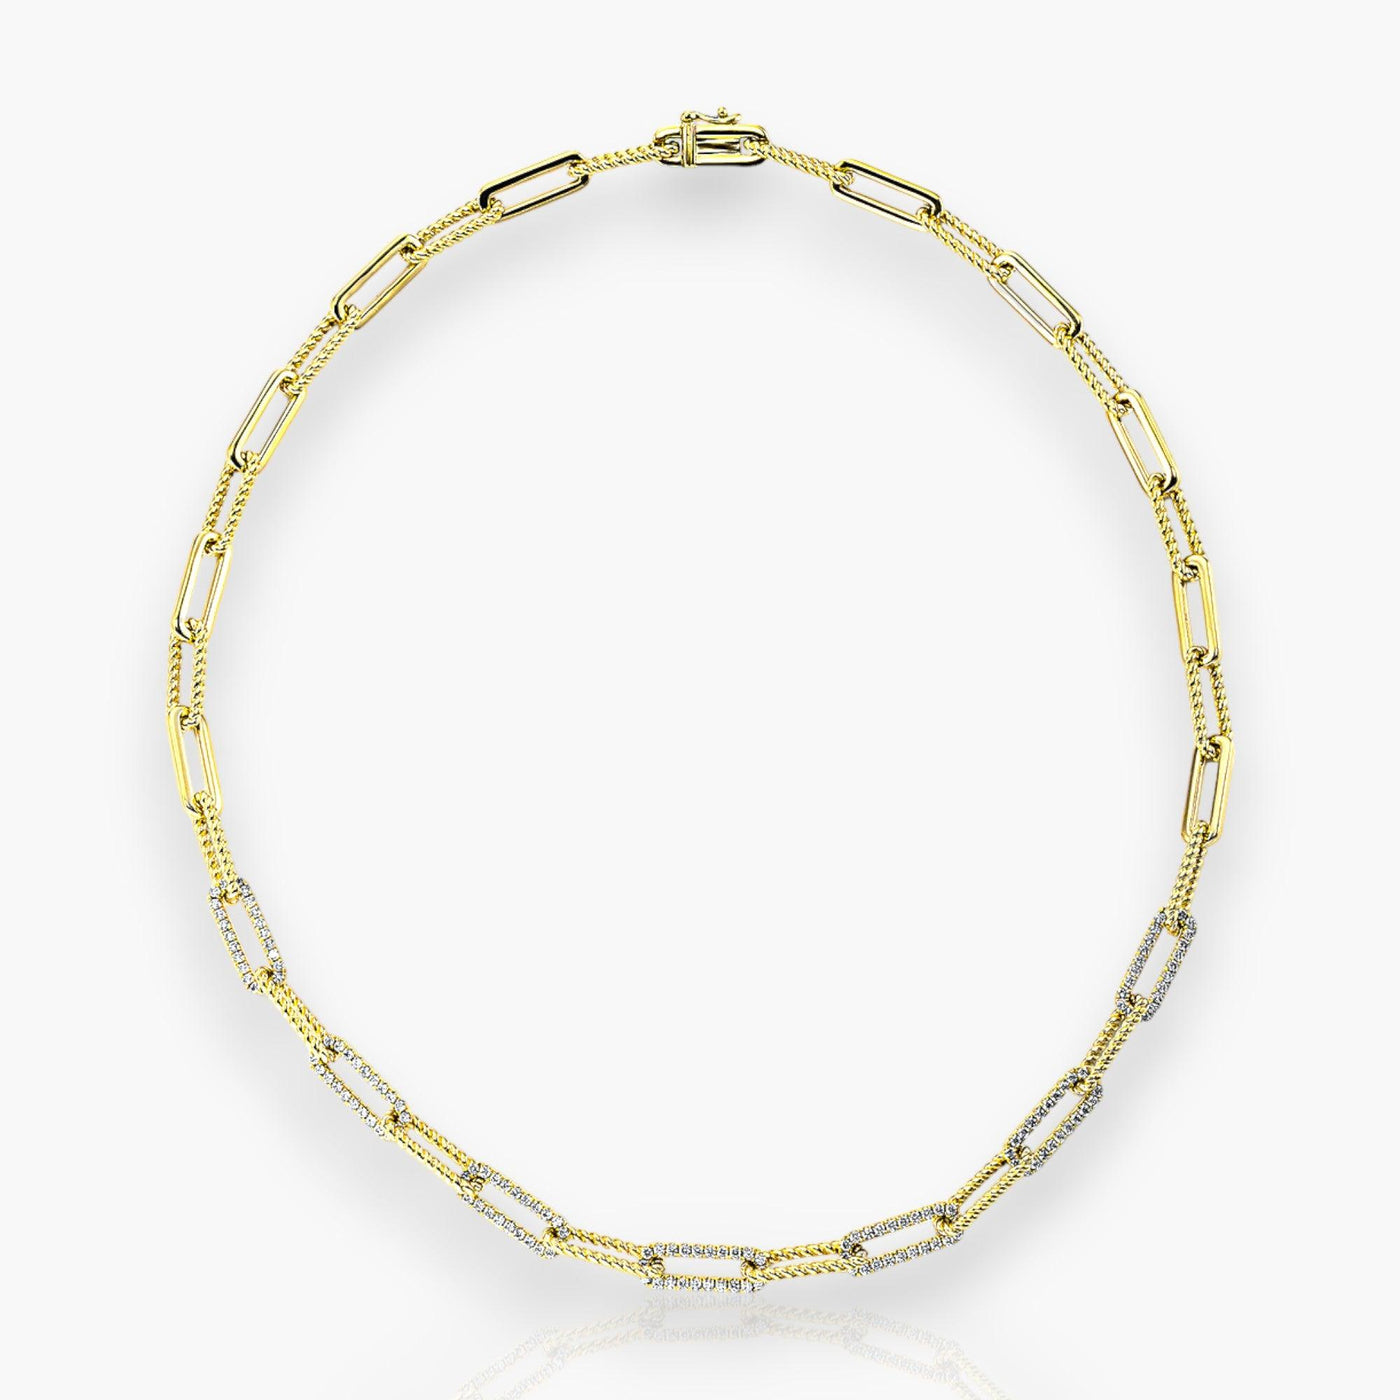 Chain Necklace - Yellow Gold - Moregola Fine Jewelry